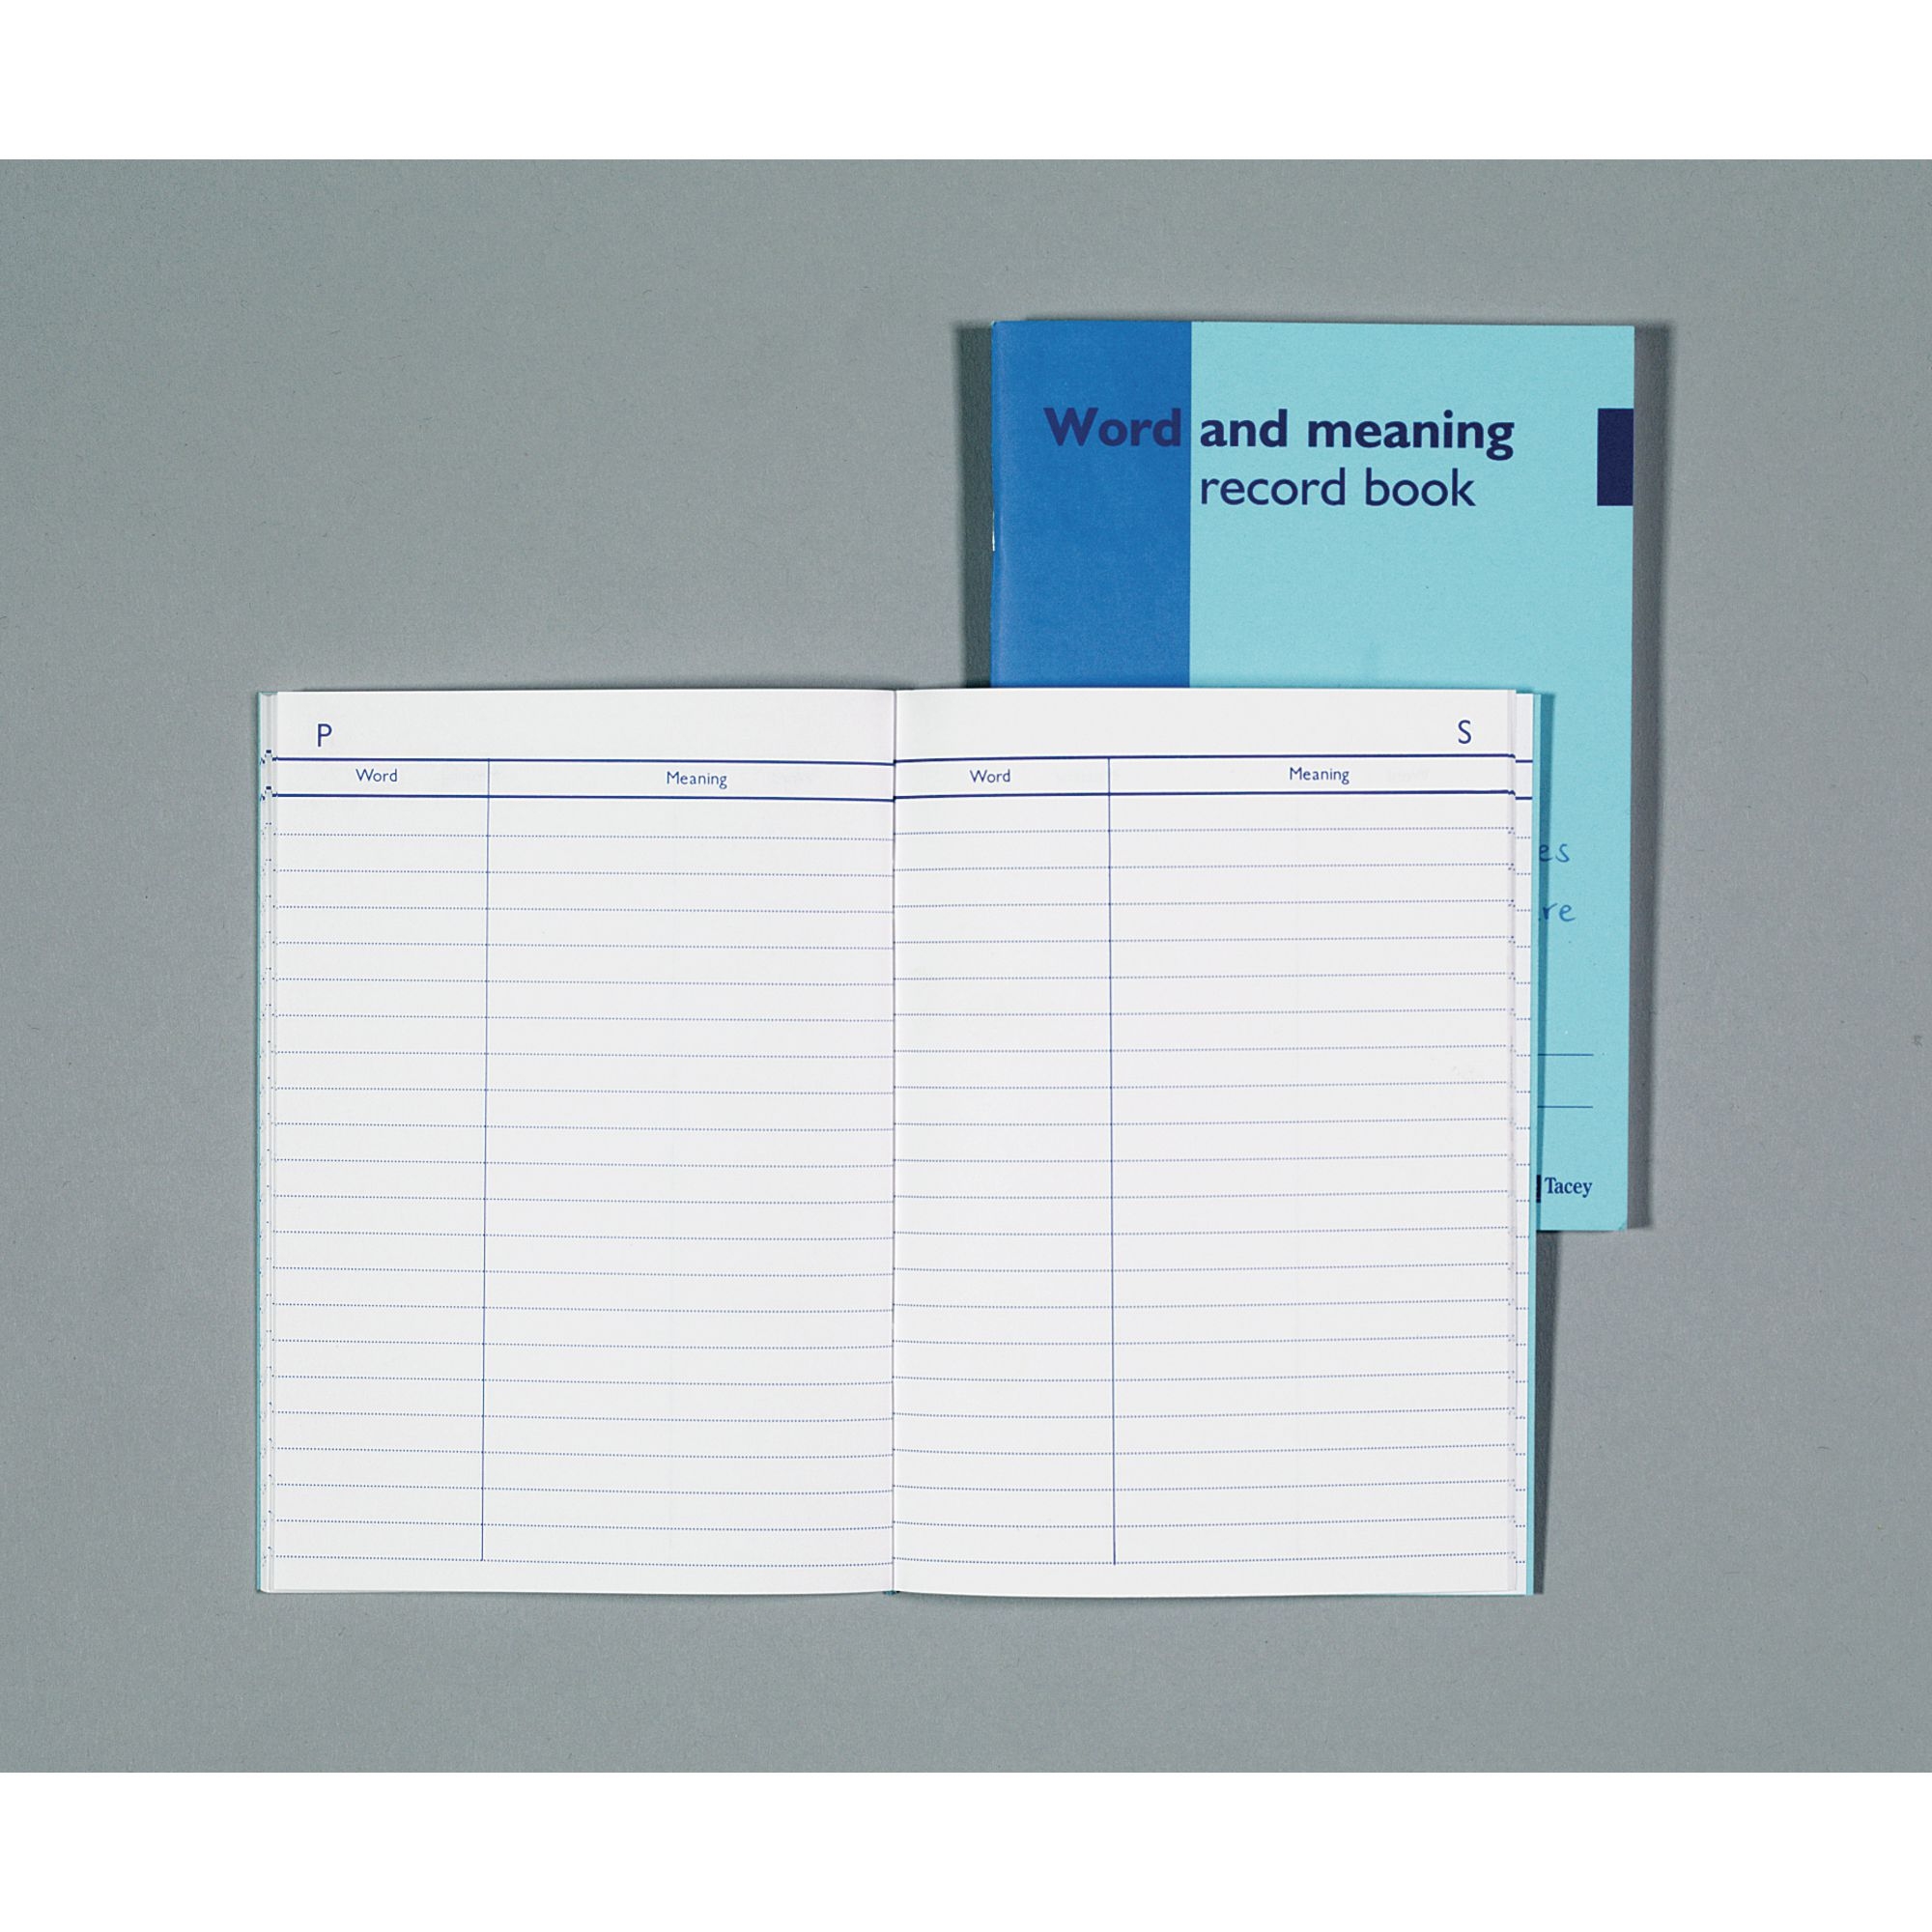 Word and Meaning Record Book